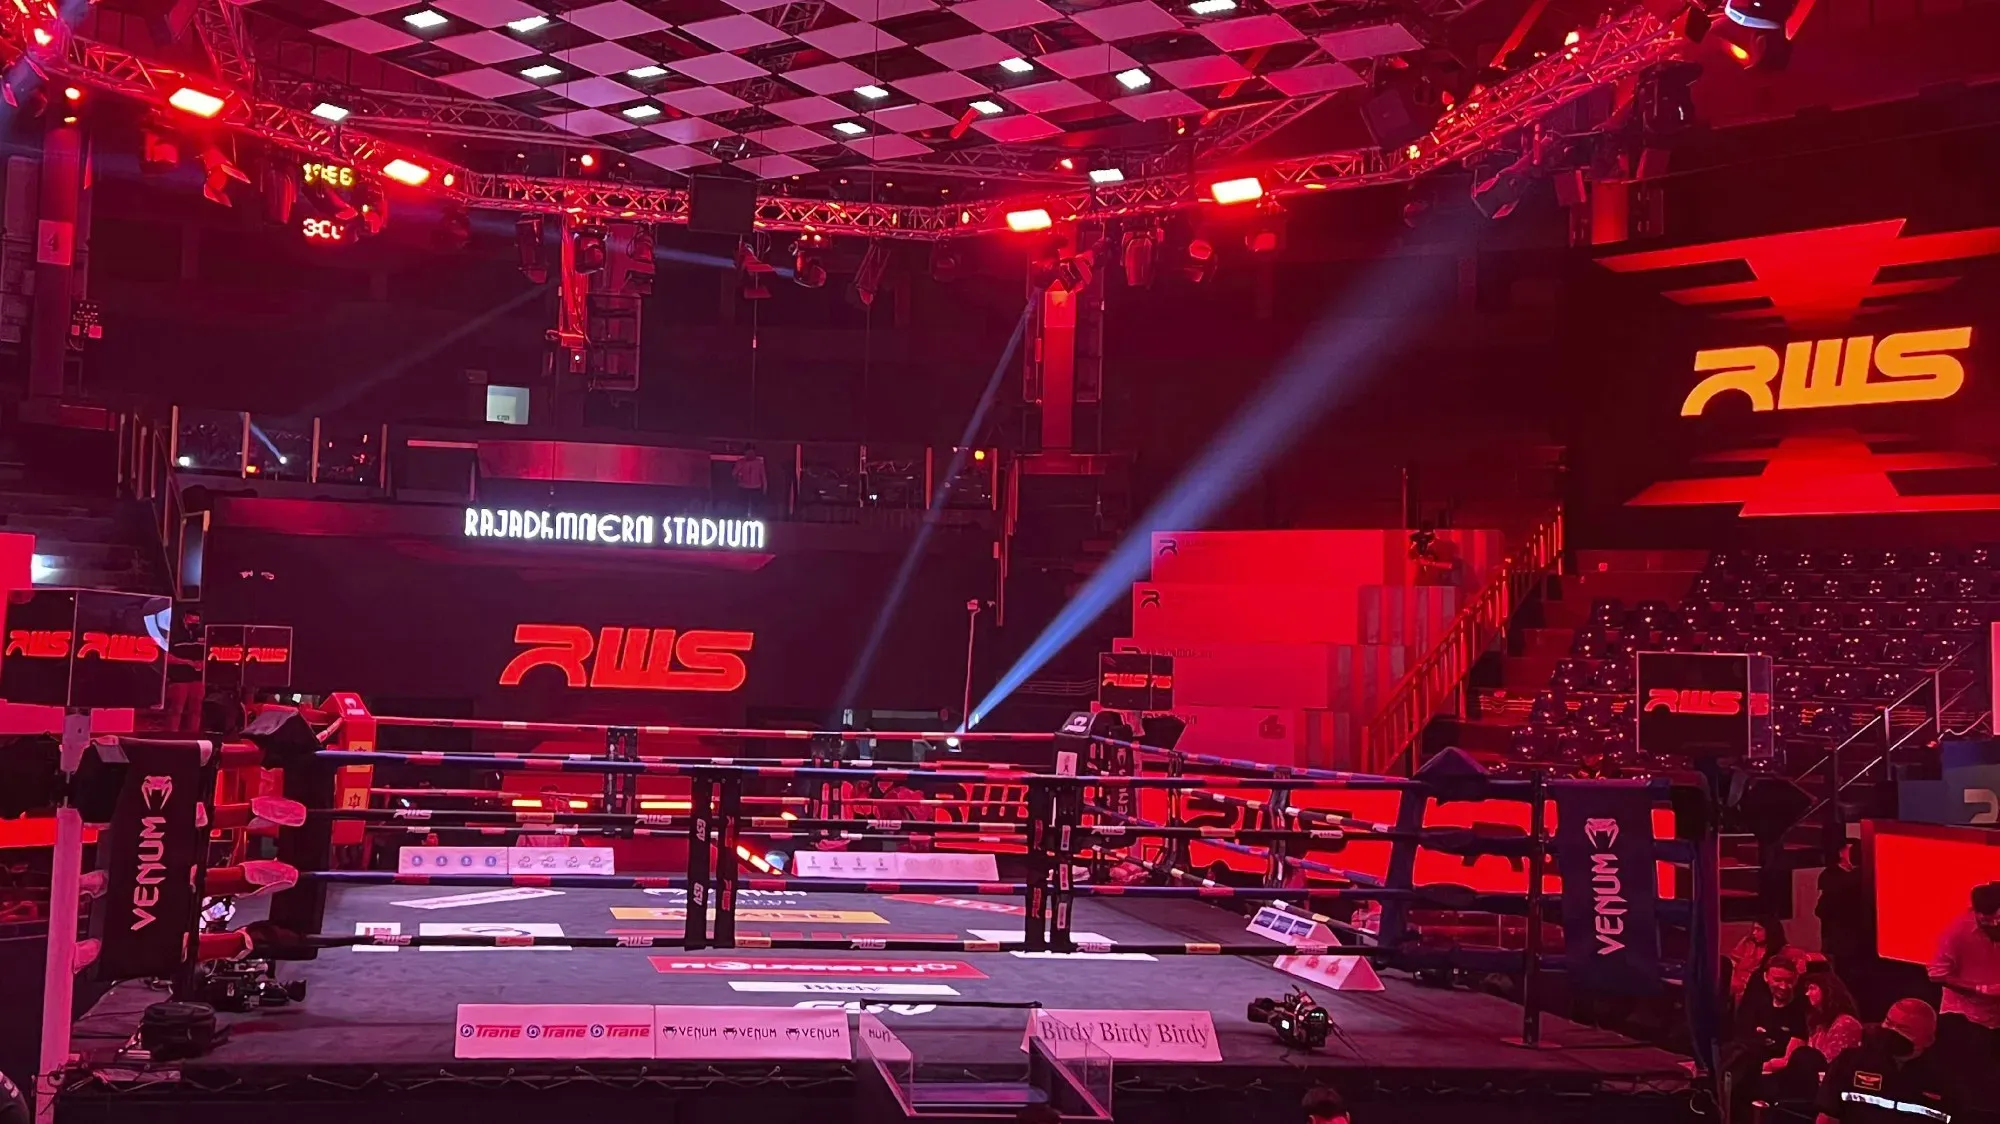 Fighting ring inside the stadium lit up with red lights